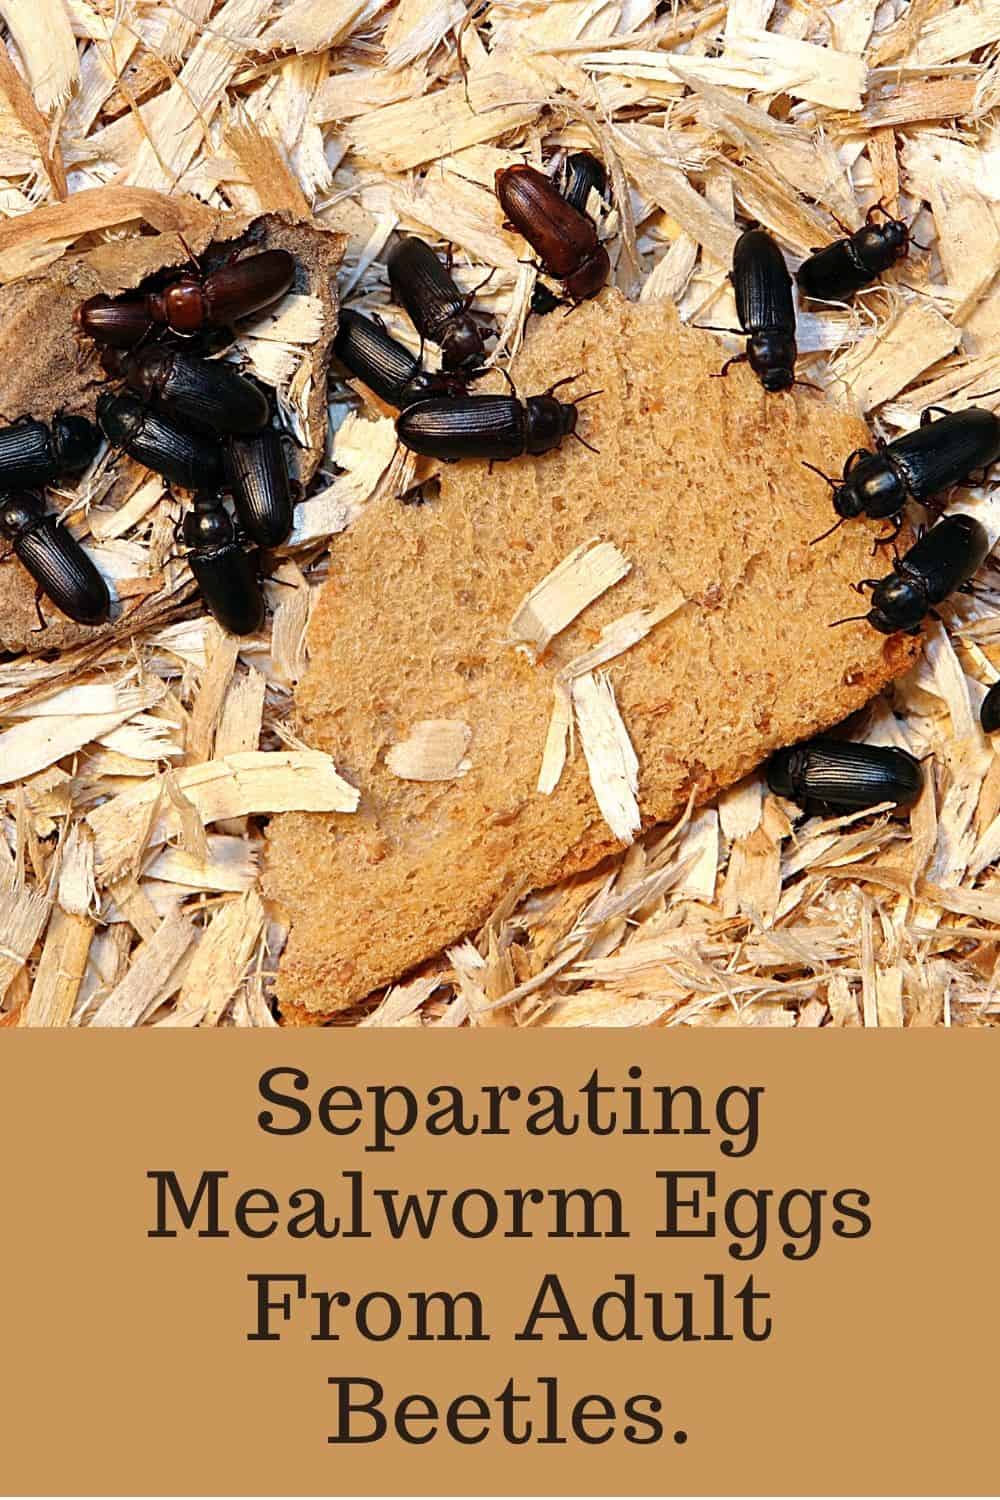 Separating Mealworm Eggs From Adult beetles